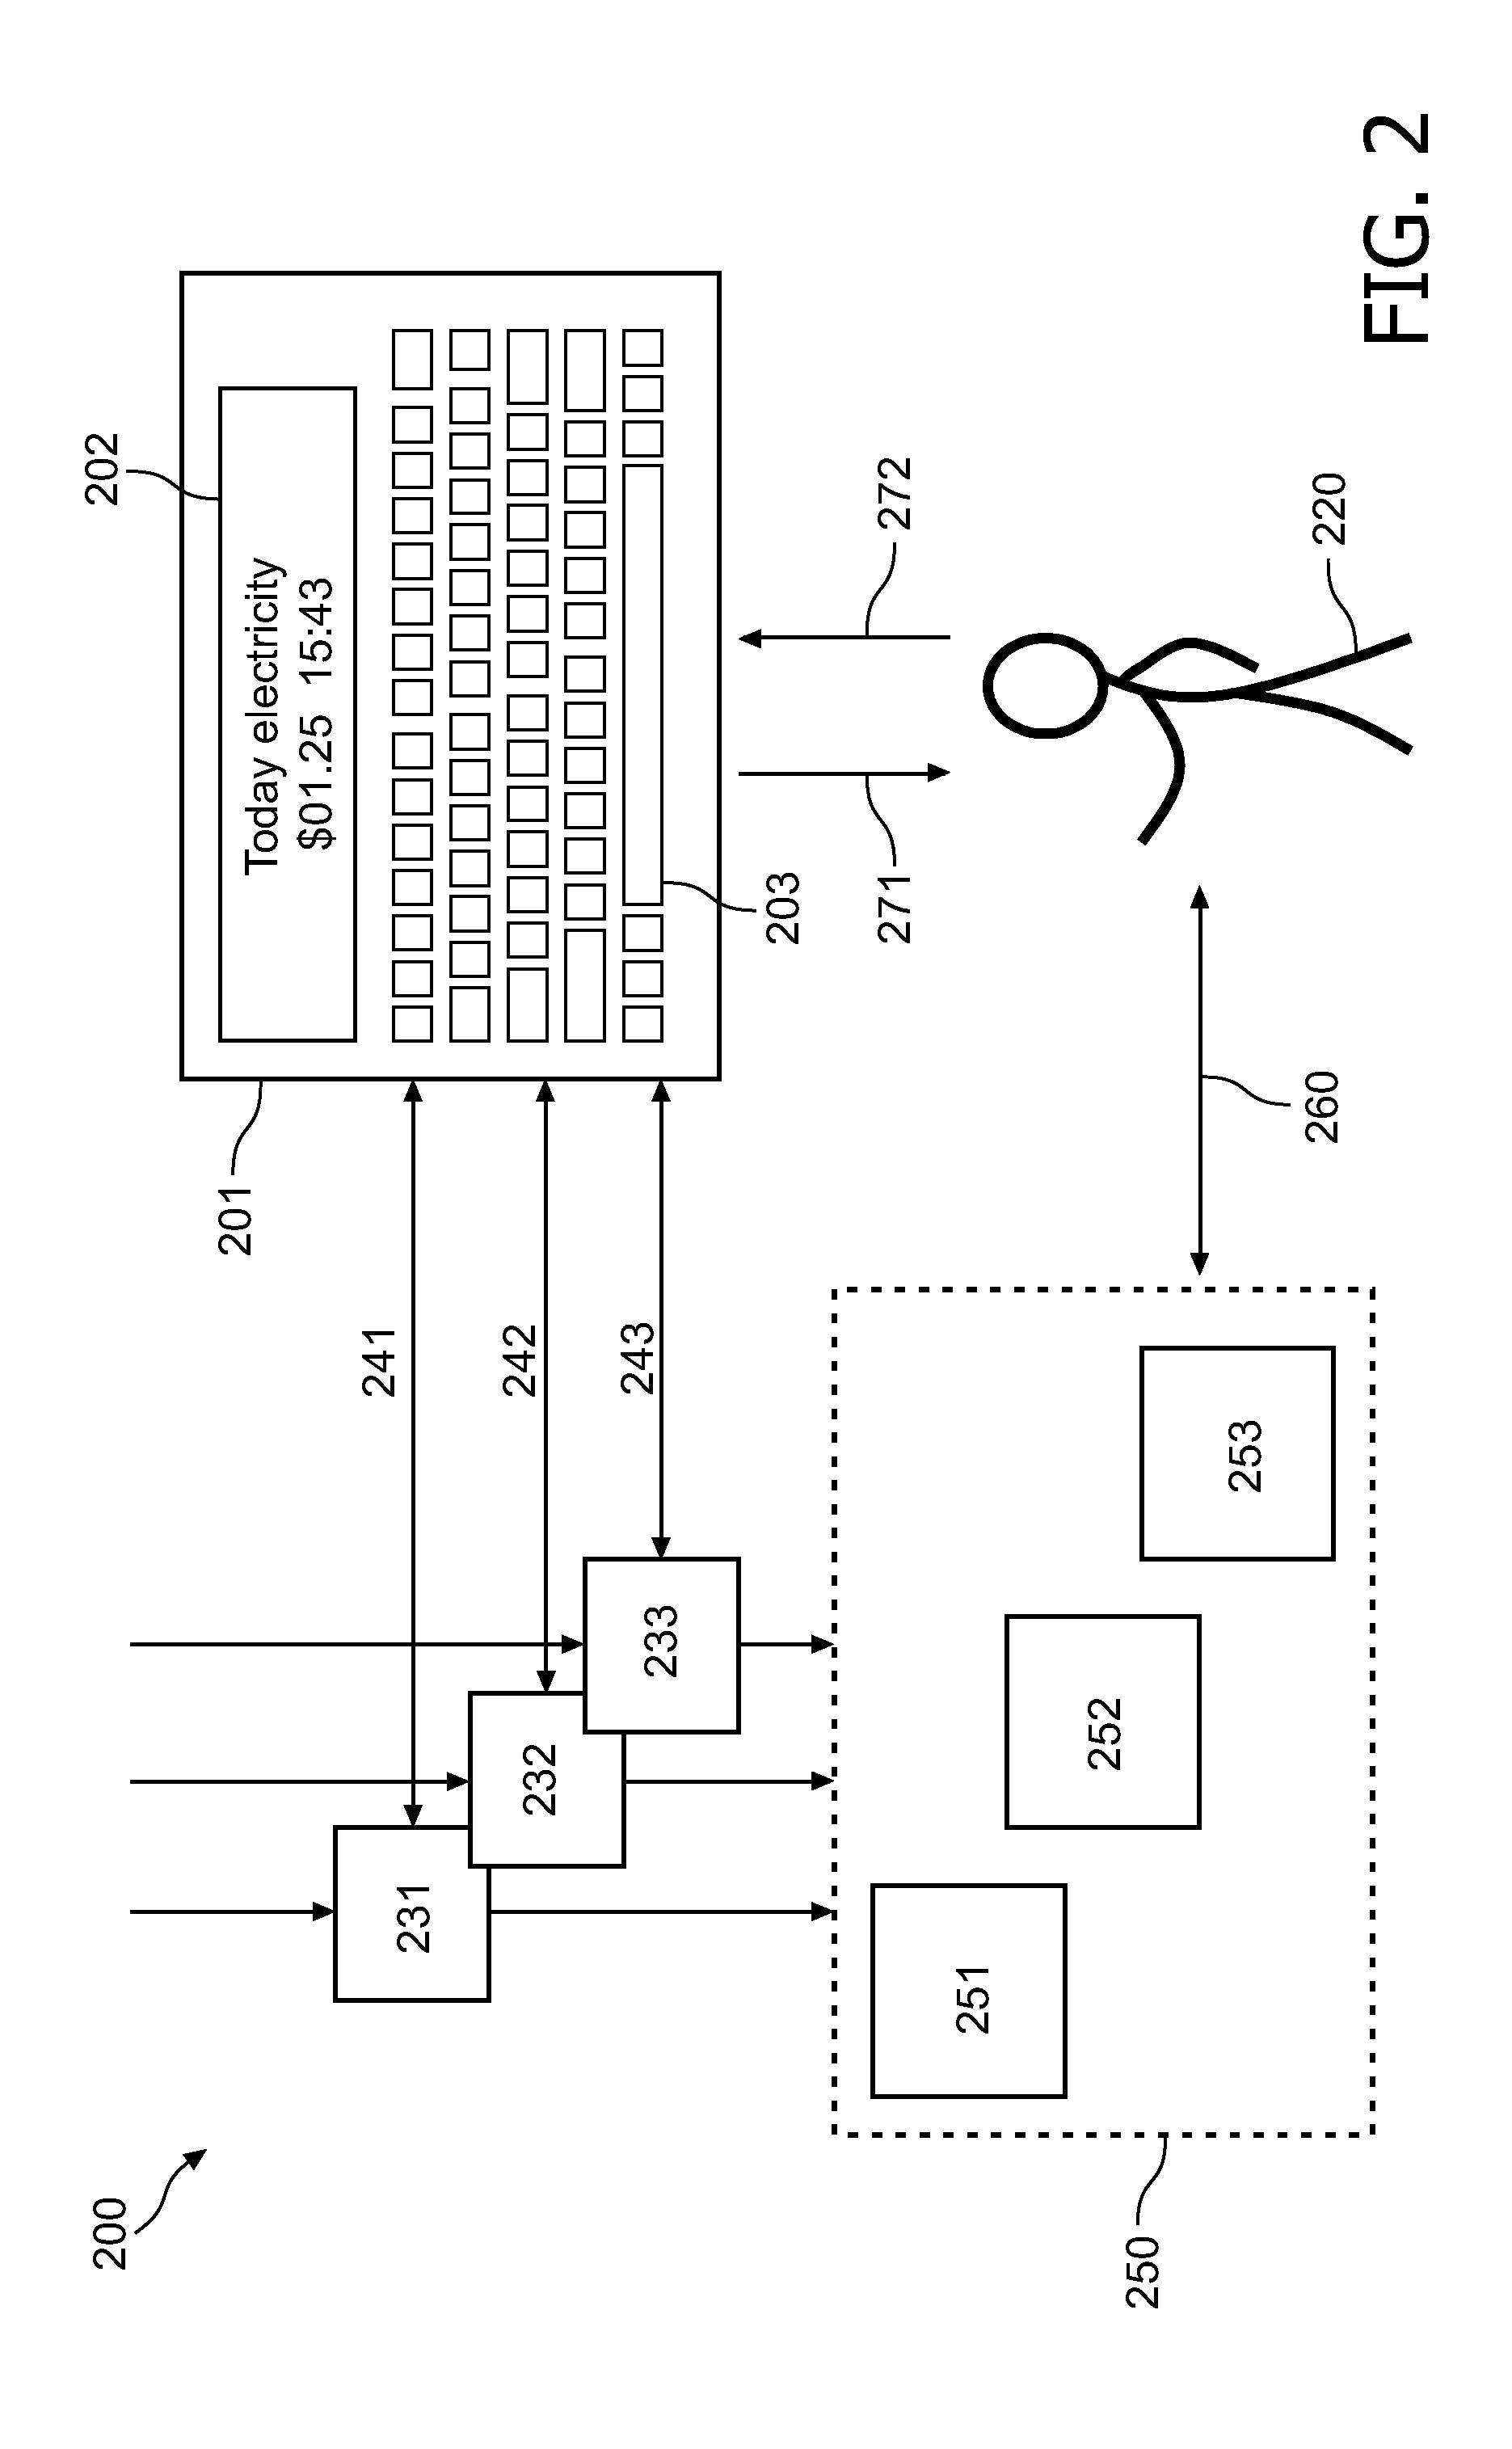 Method, apparatus and system for user-assisted resource usage determination